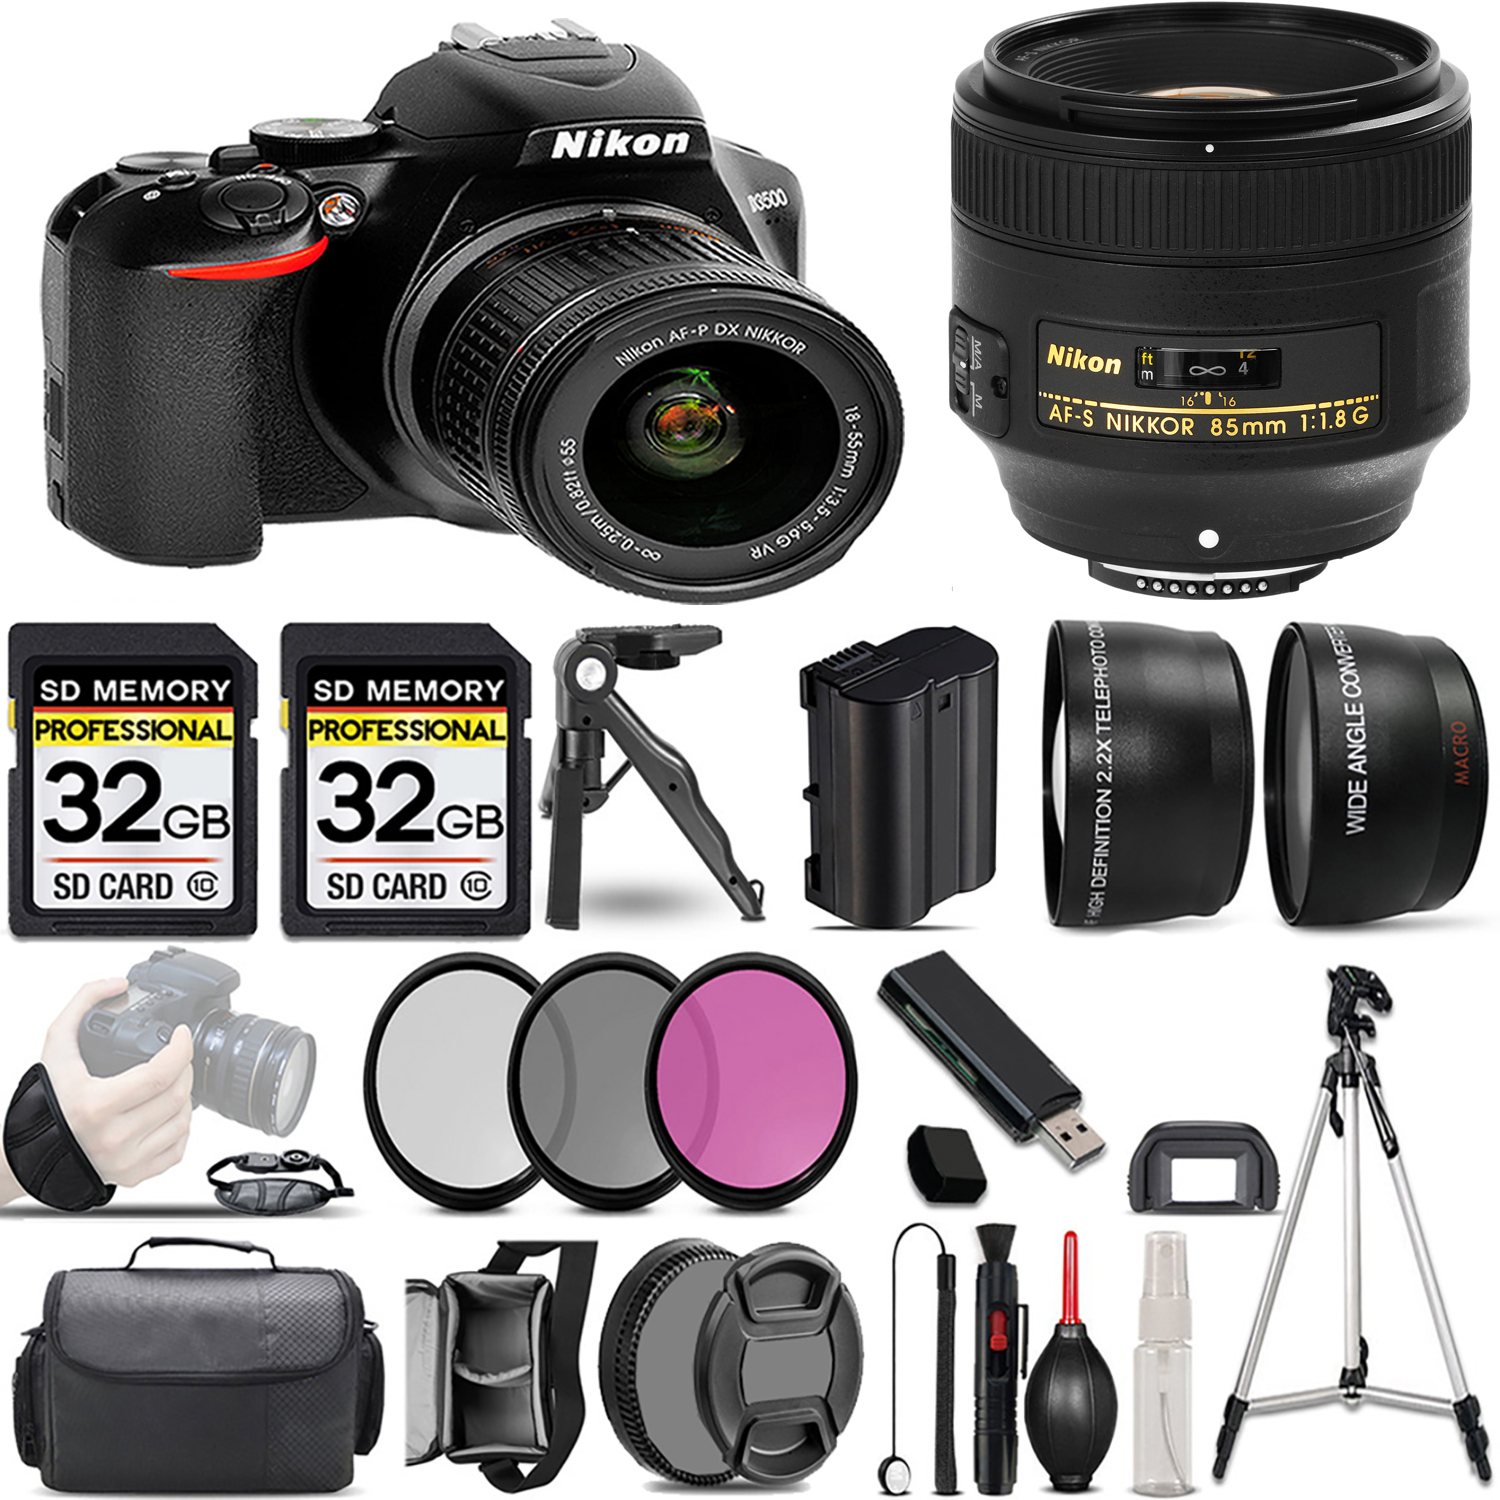 D3500 DSLR Camera with 18-55mm Lens + 85mm f/1.8G Lens + 3 Piece Filter Set + 64GB *FREE SHIPPING*